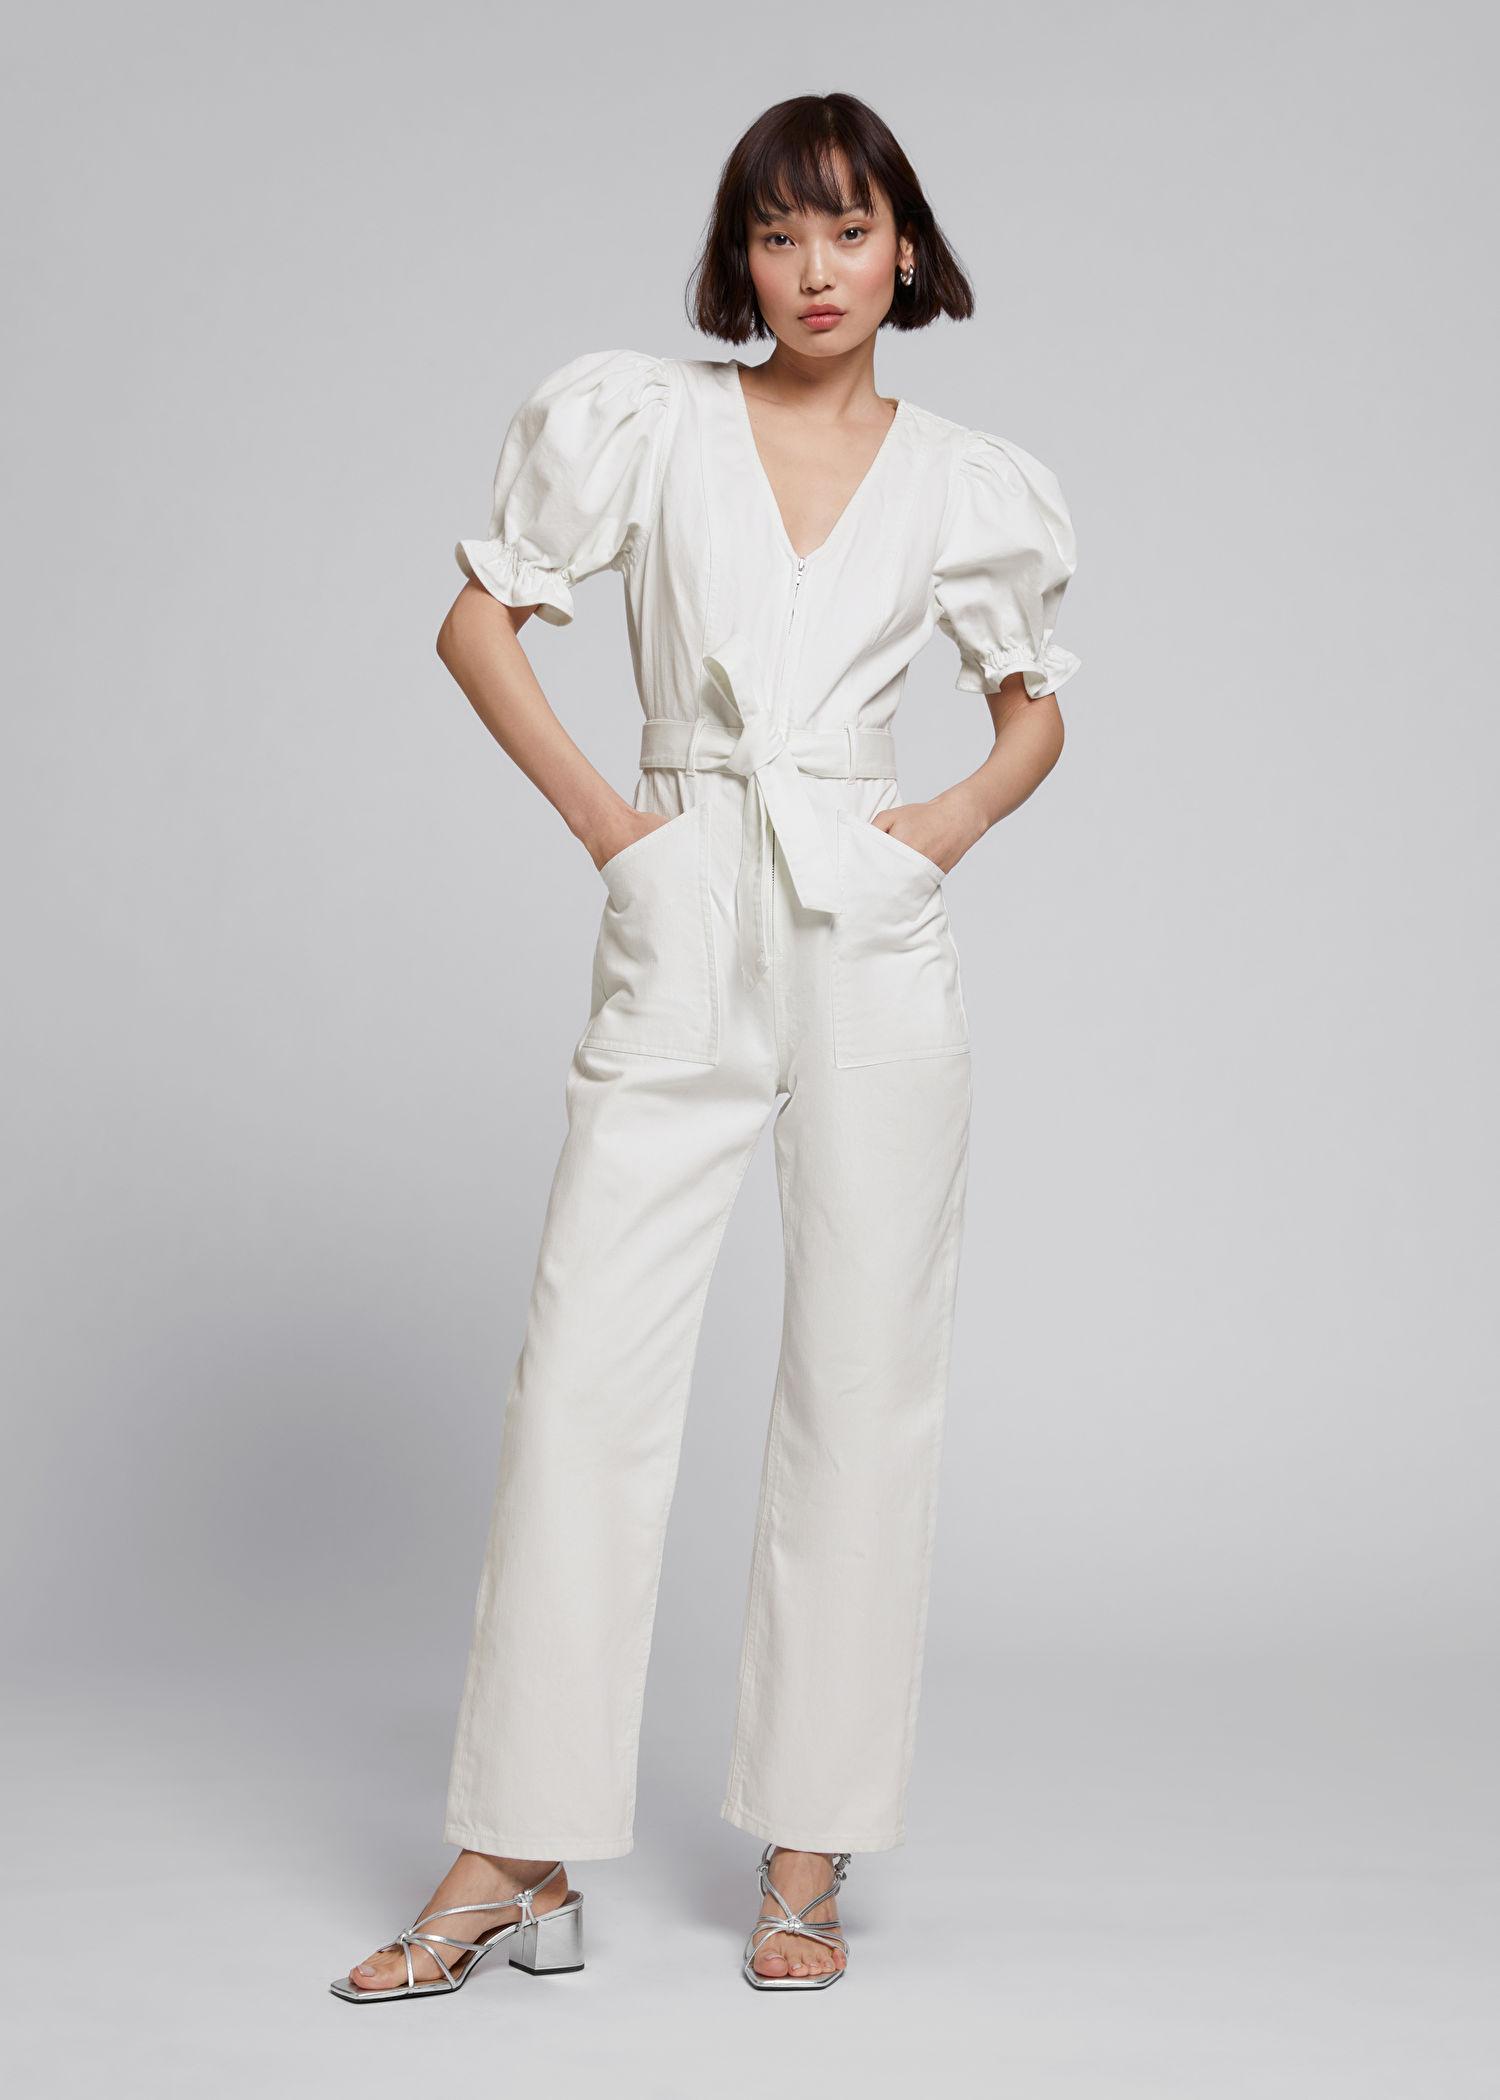 & Other Stories Puff Sleeve V-neck Jumpsuit in White | Lyst Australia